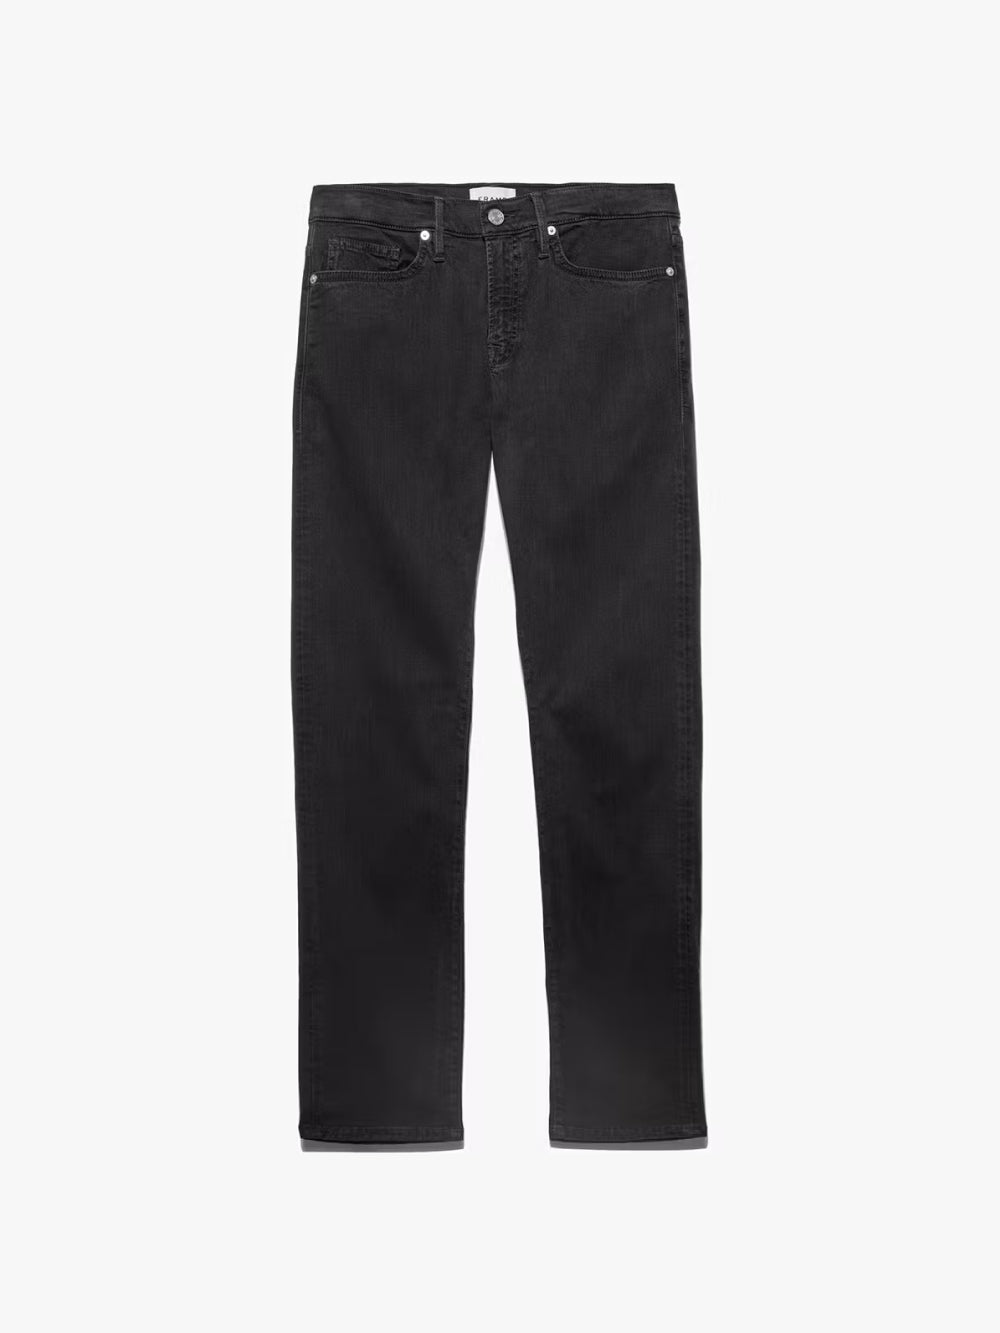 L'Homme Slim Brushed Twill in Charcoal Grey – FRAME